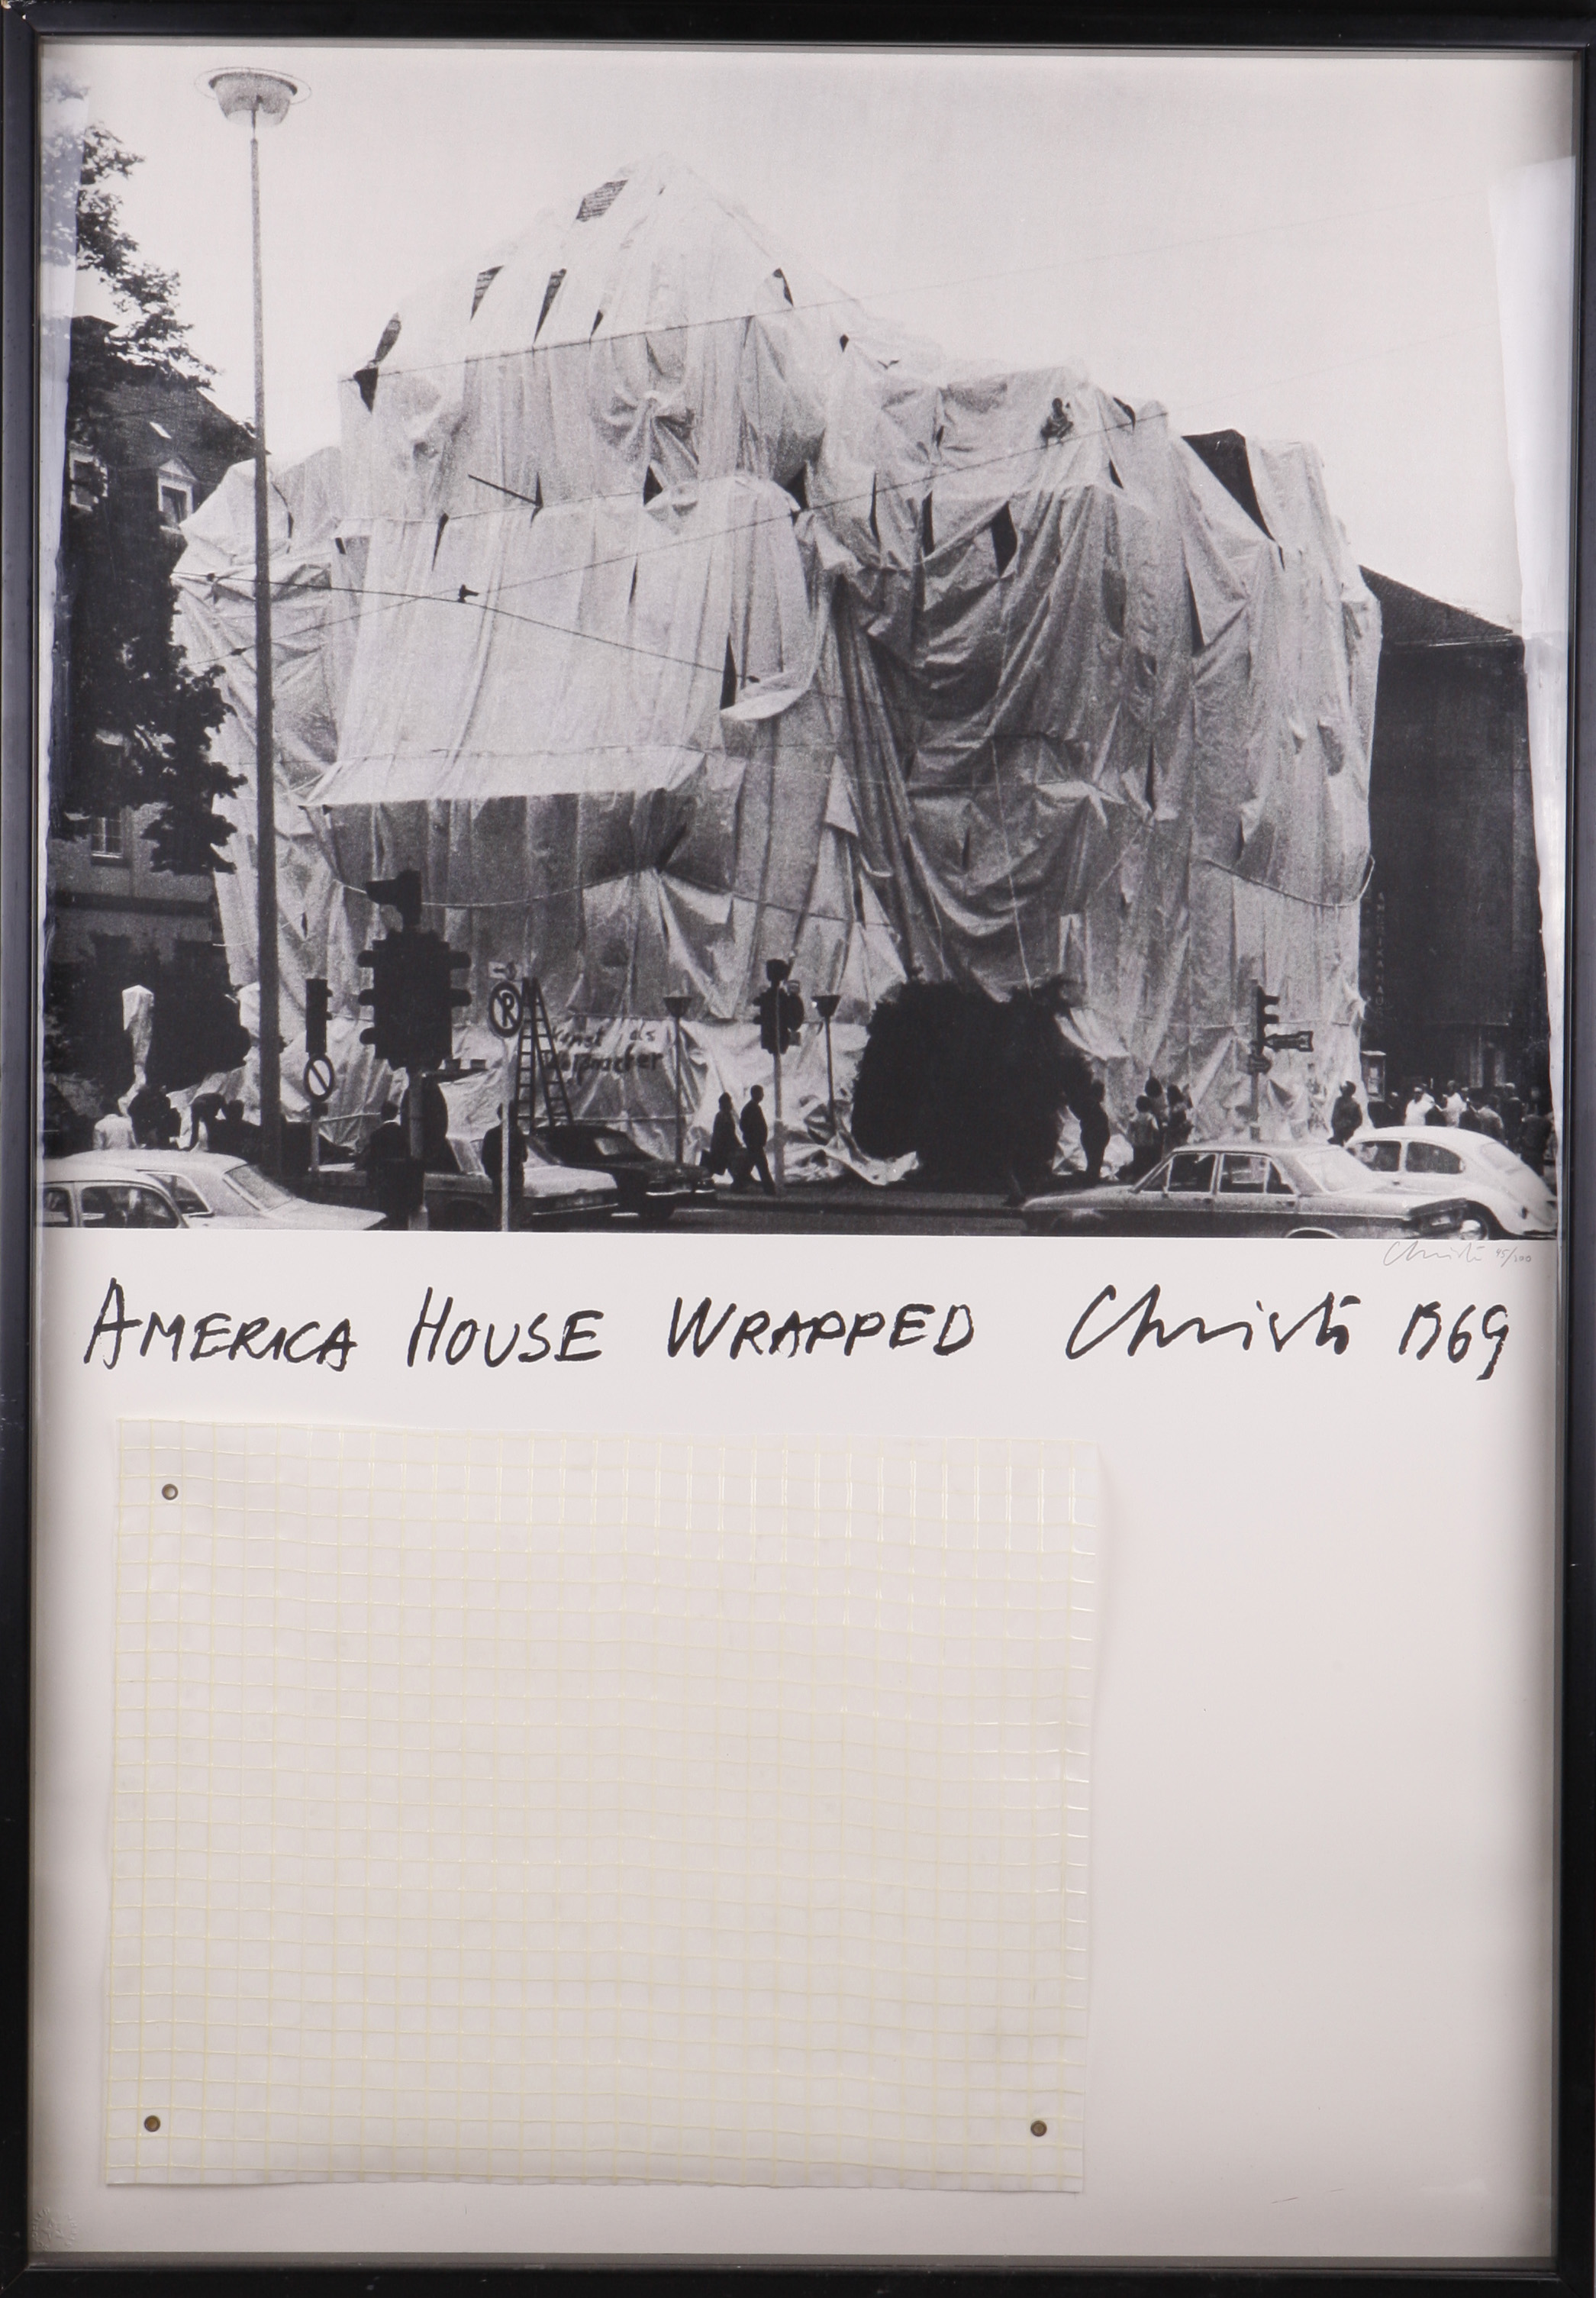 Christo (1935) and Jeanne Claude, America House Wrapped, 1969, silk screen with applied plastic